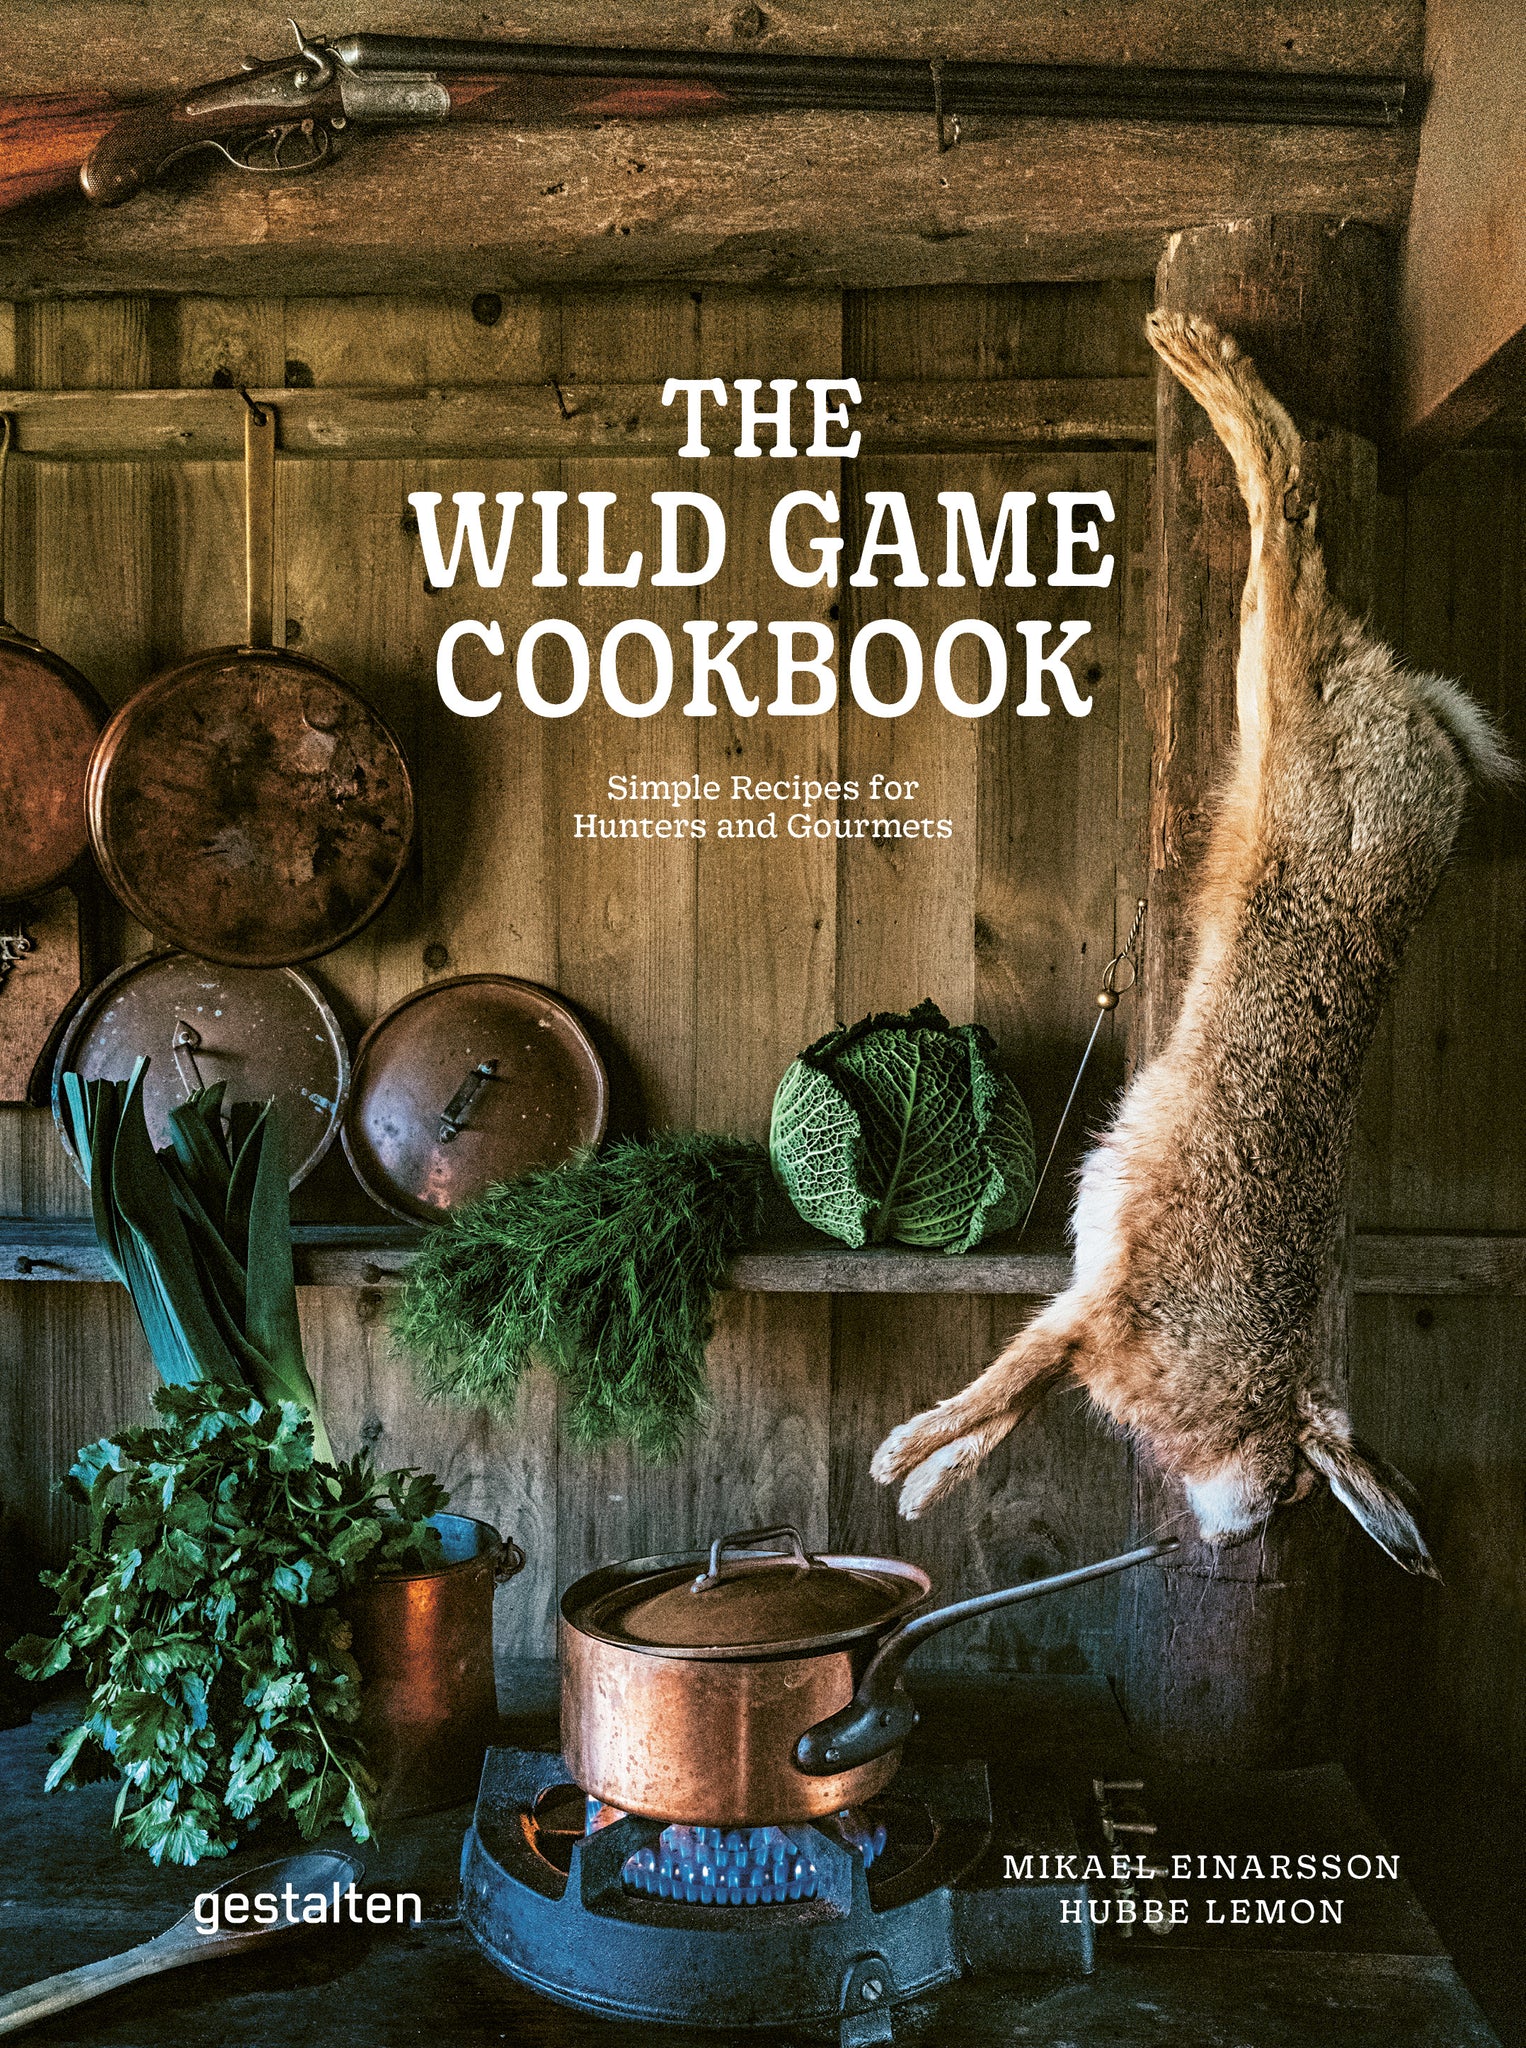 Wild Game Cookbook, the cover